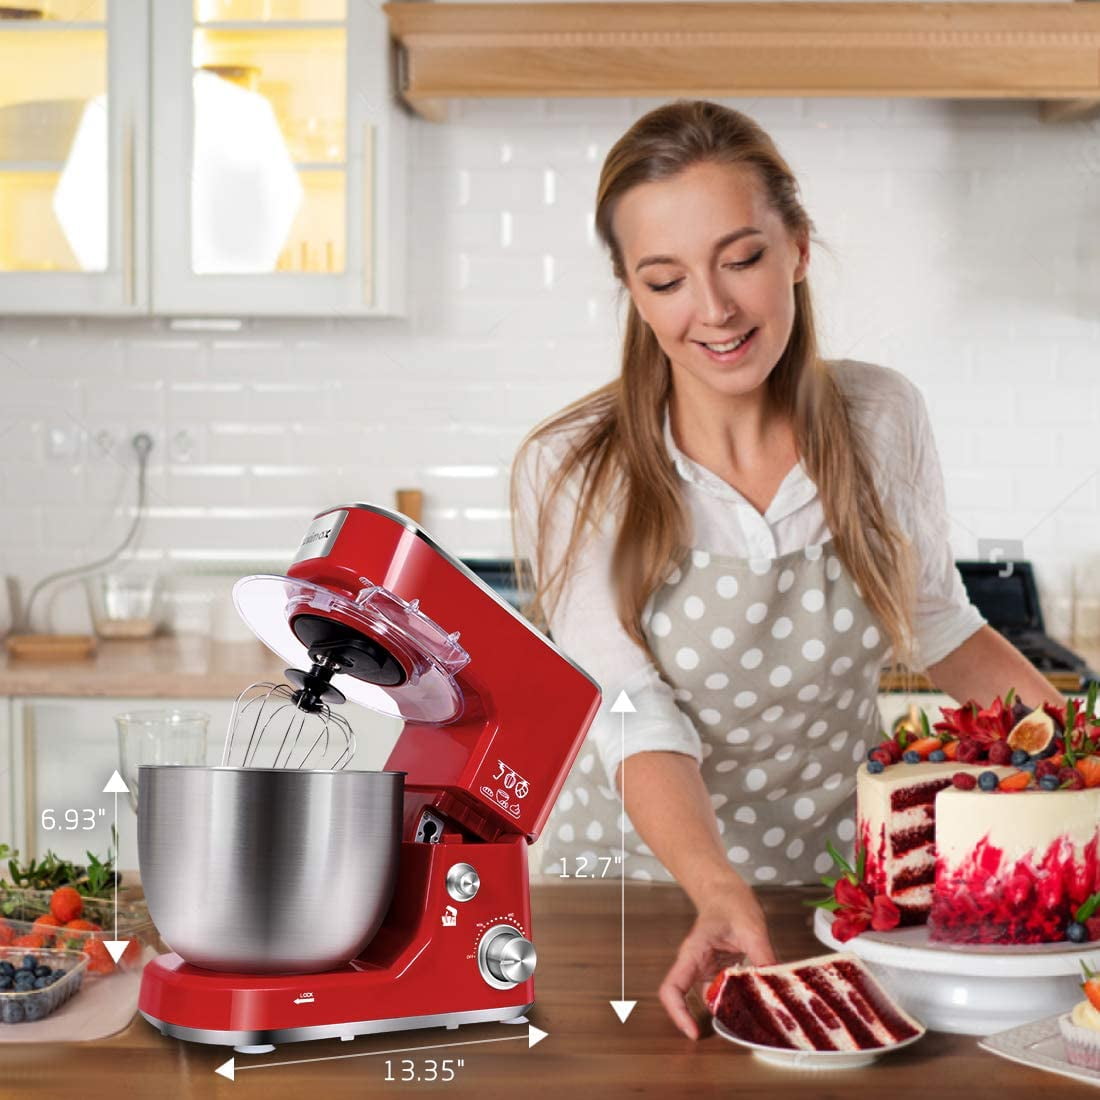 Stand Mixer, Zurio 5 Quarts Electric Mixer, 10-Speed Tilt-Head Food Mixer  with Stainless Steel Bowl, Dishwasher-Safe Attachments for Home Baking